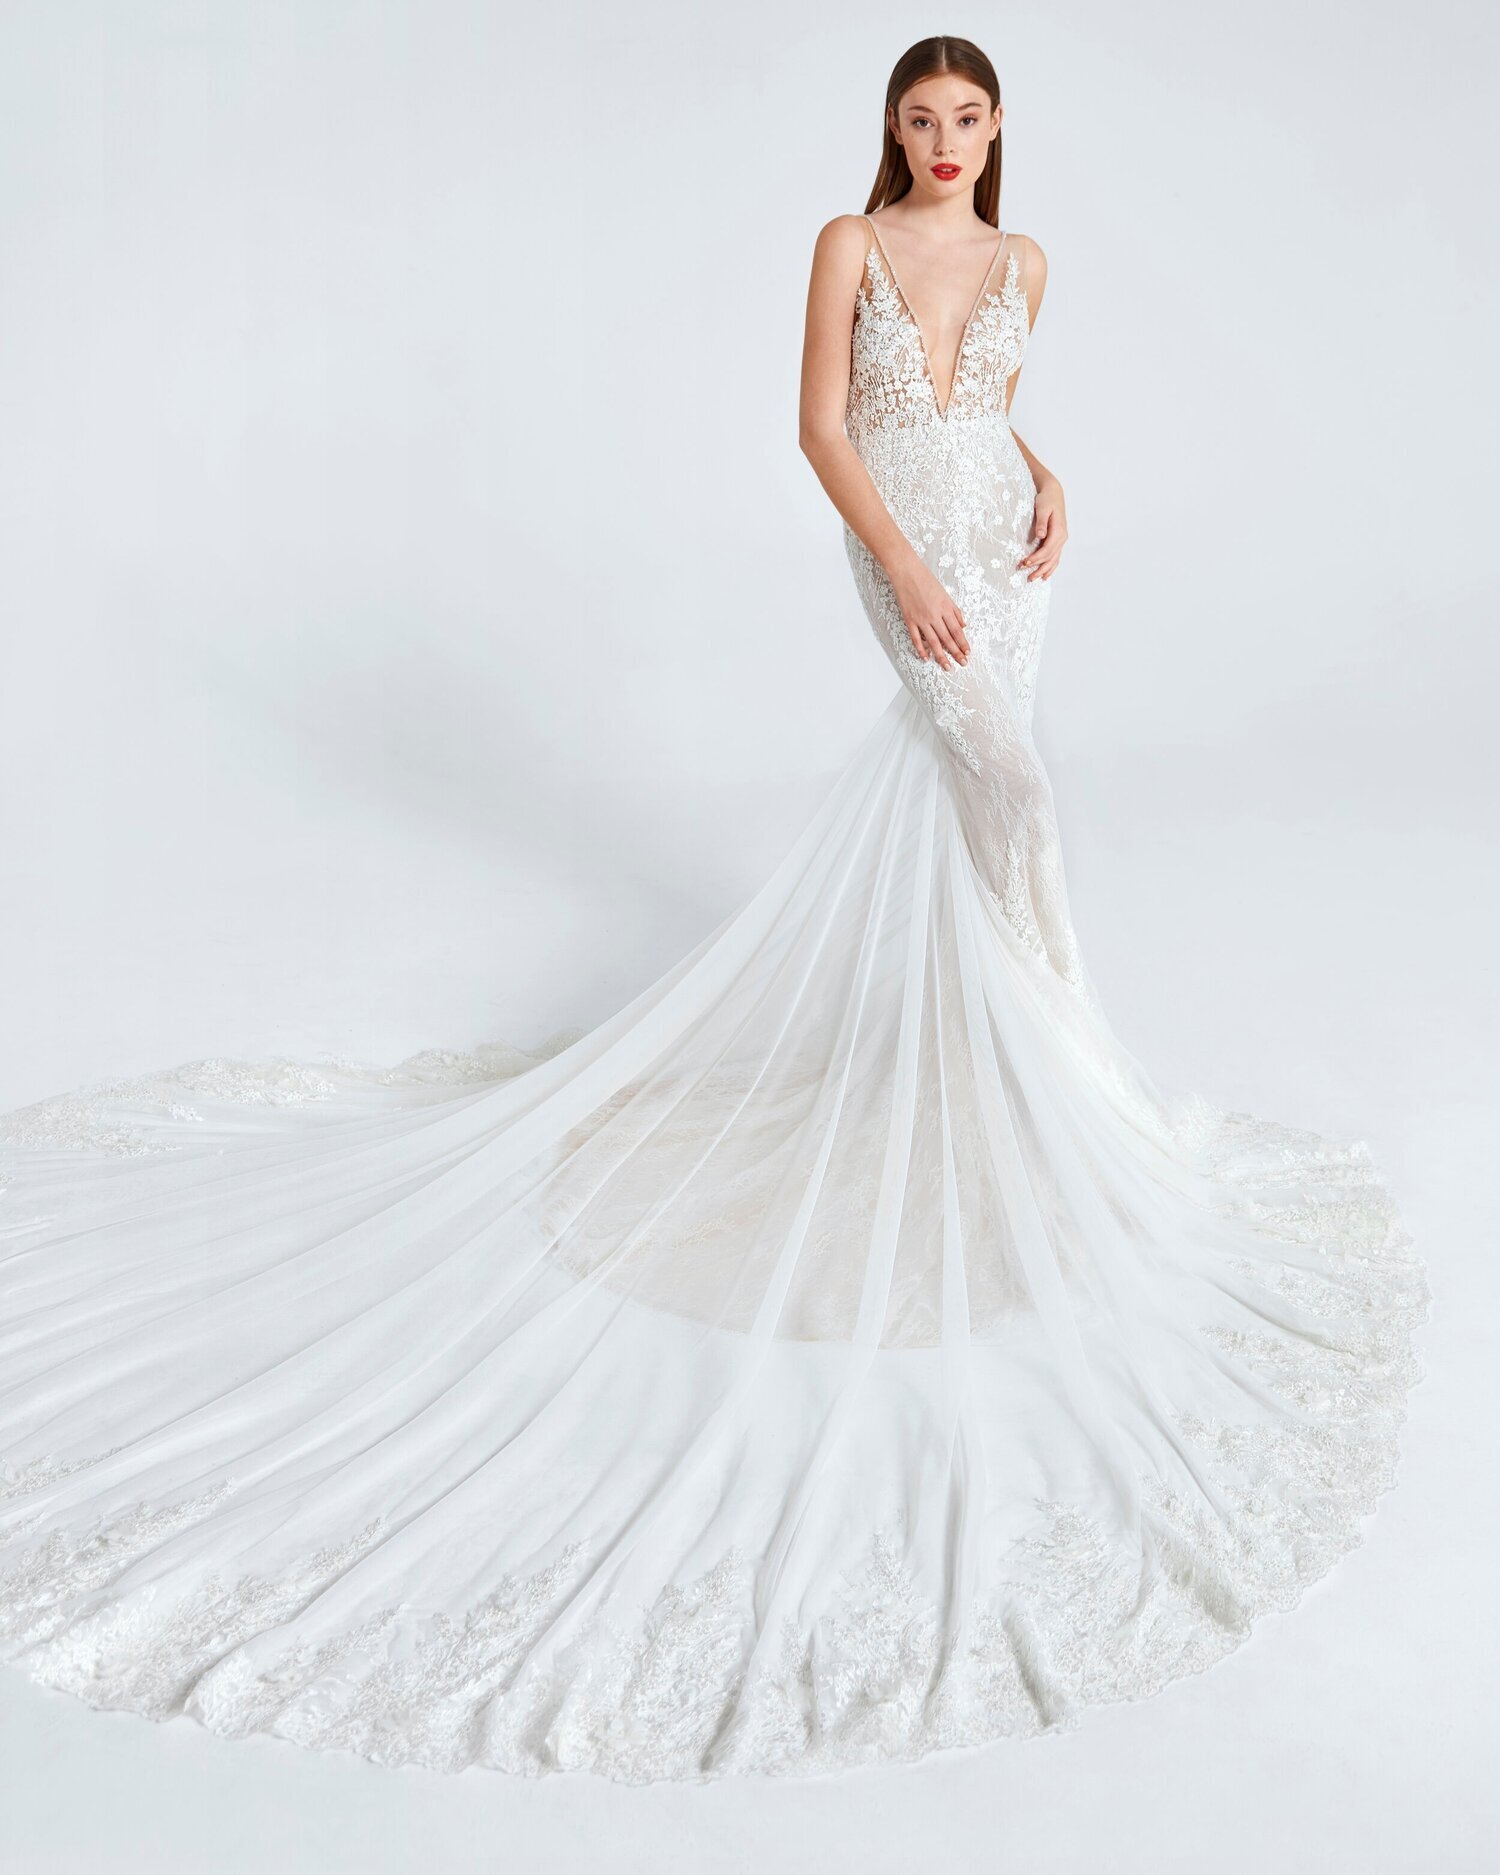 Flirty by Ines Di Santo. Luxurious, fitted wedding dress with deep v-neckline and lace detailing. 